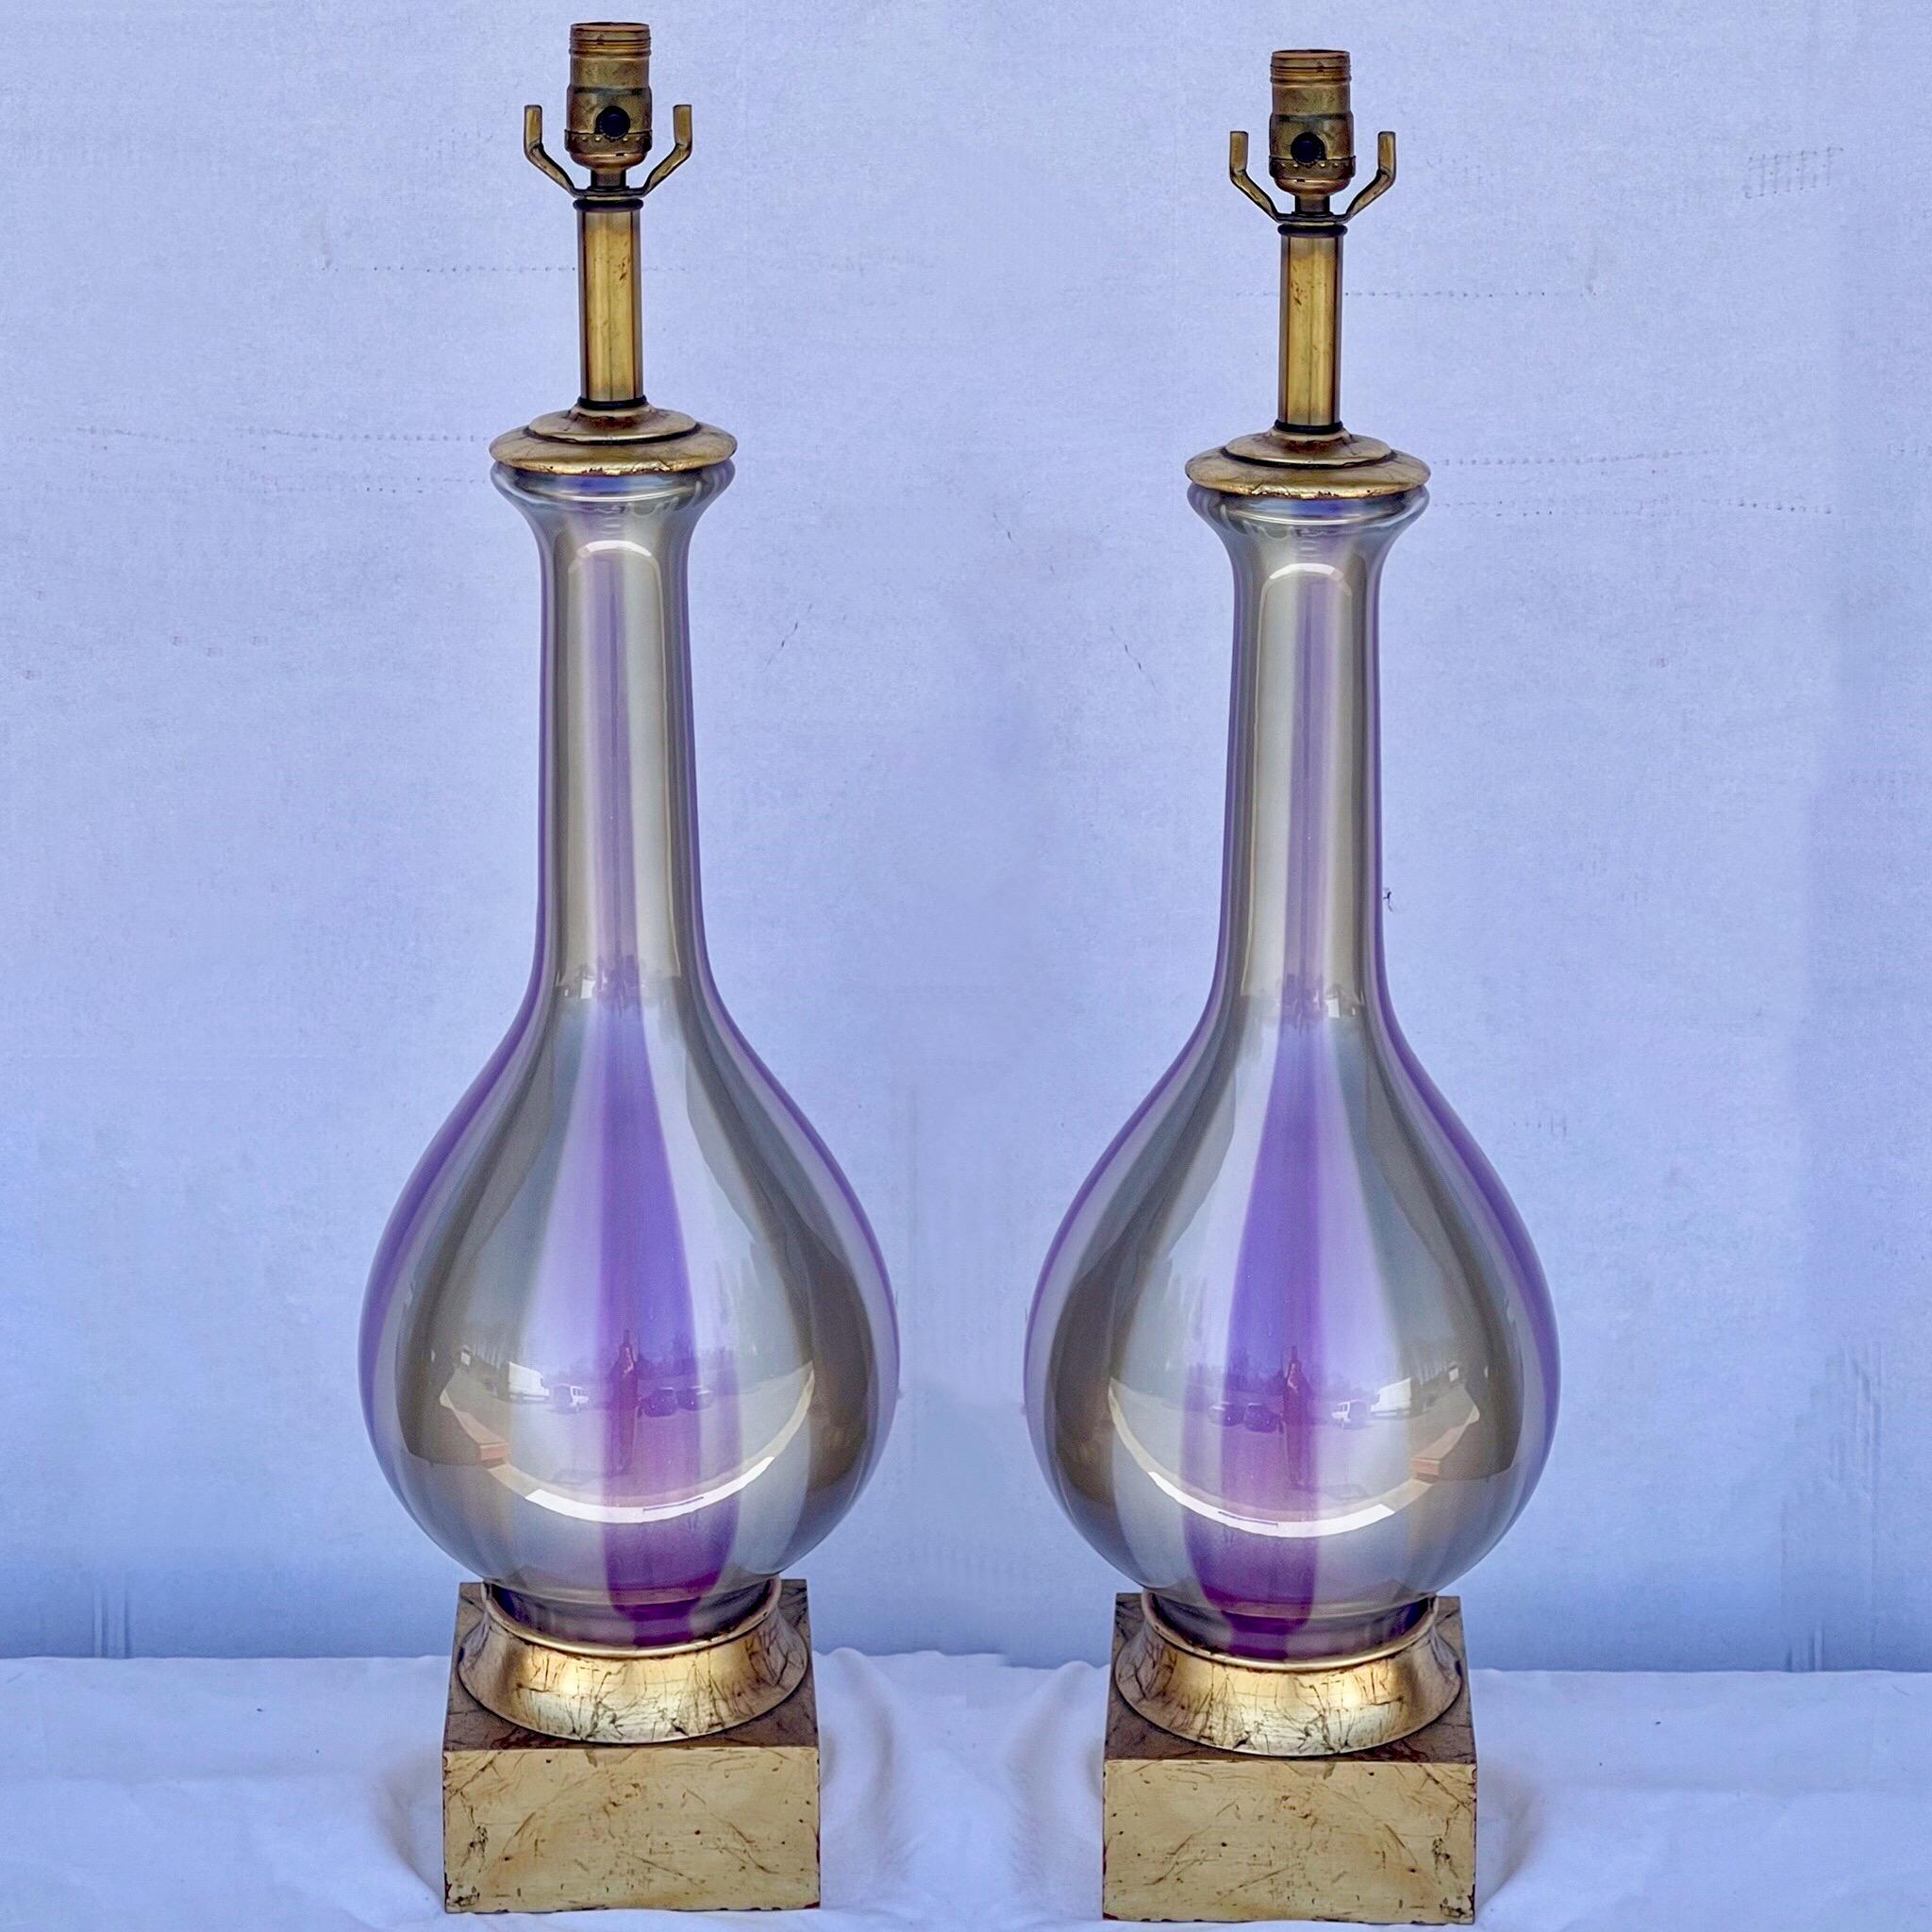 20th Century Mid-Century Modern Murano Blown Glass Table Lamps with Giltwood Bases, Pair For Sale